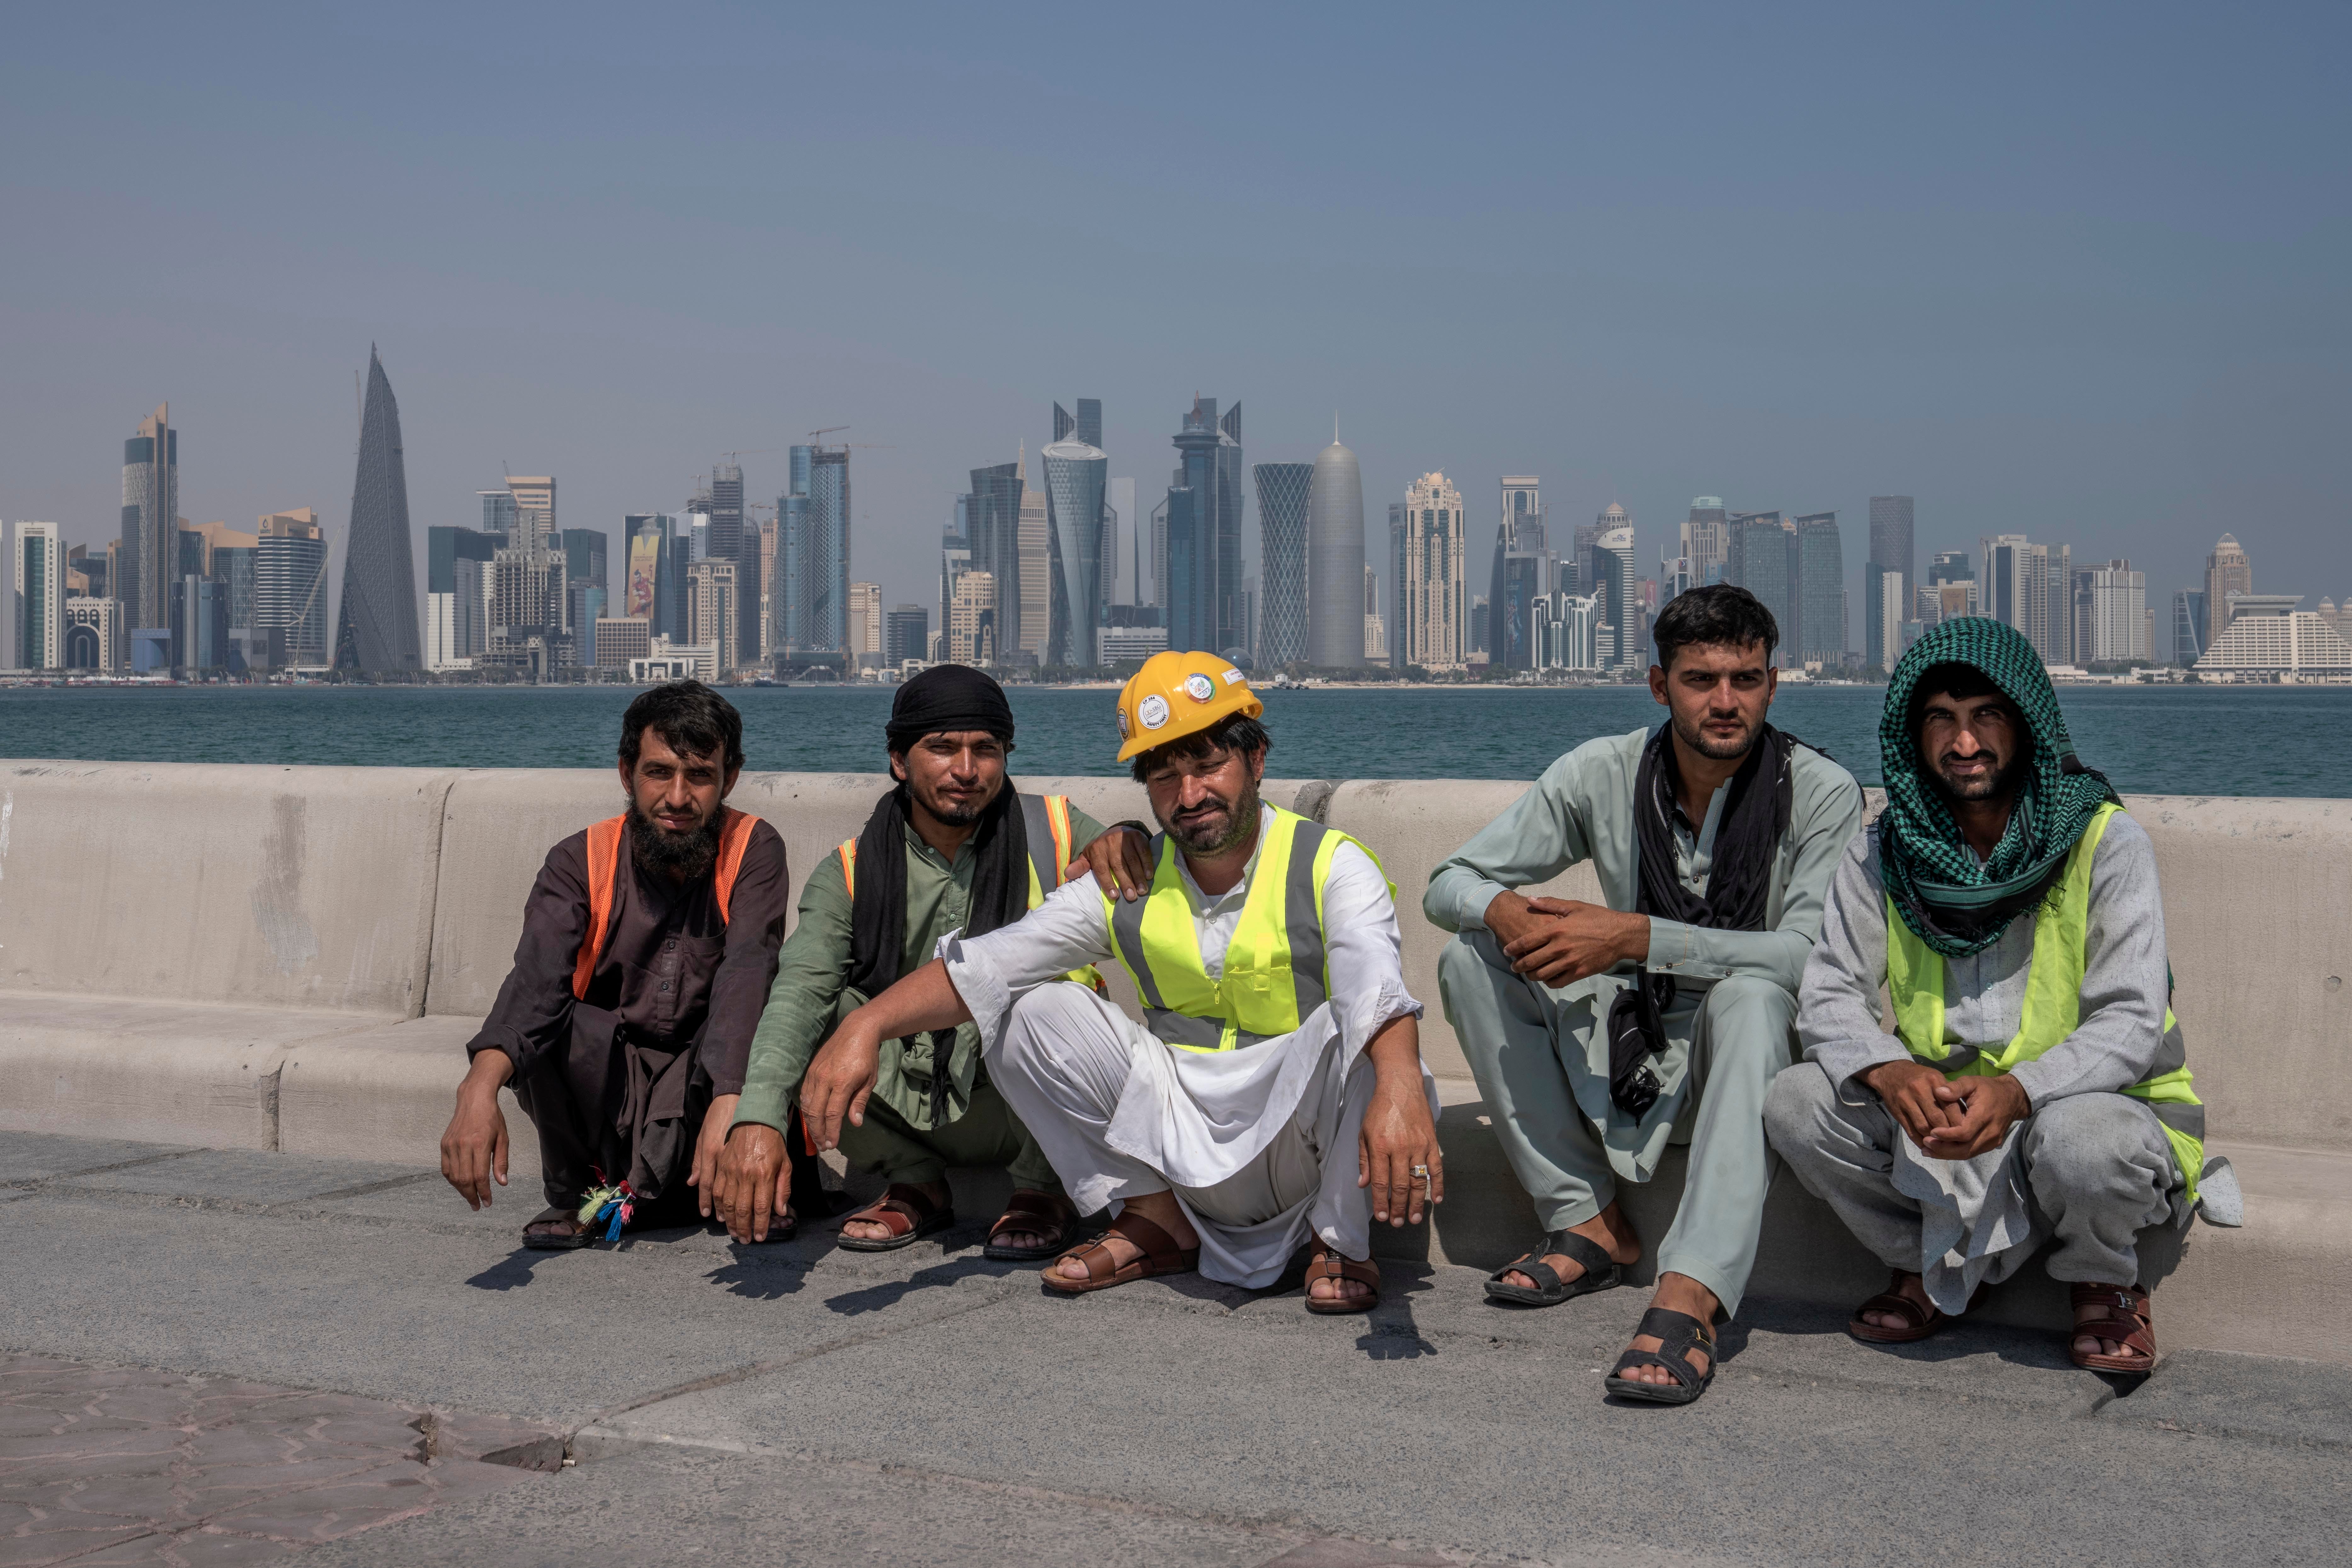 Migrants workers on the Qatar World Cup suffered “human rights abuses” according to an Amnesty investigation